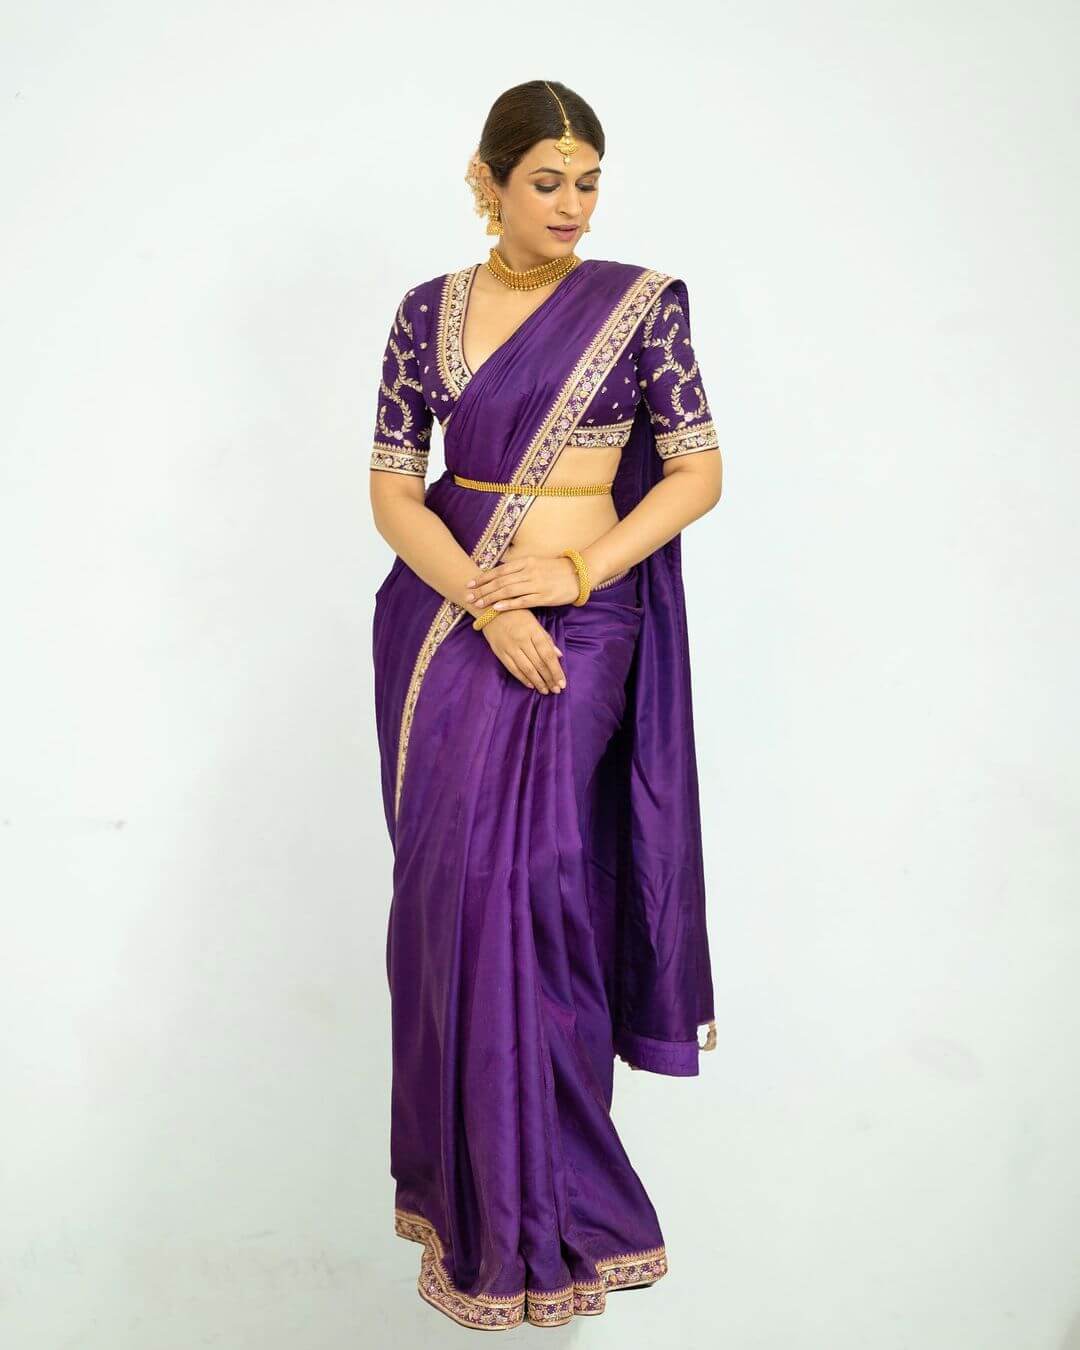 Shraddha Das Magnificent Look In Purple Saree Paired With Gold Jewellery